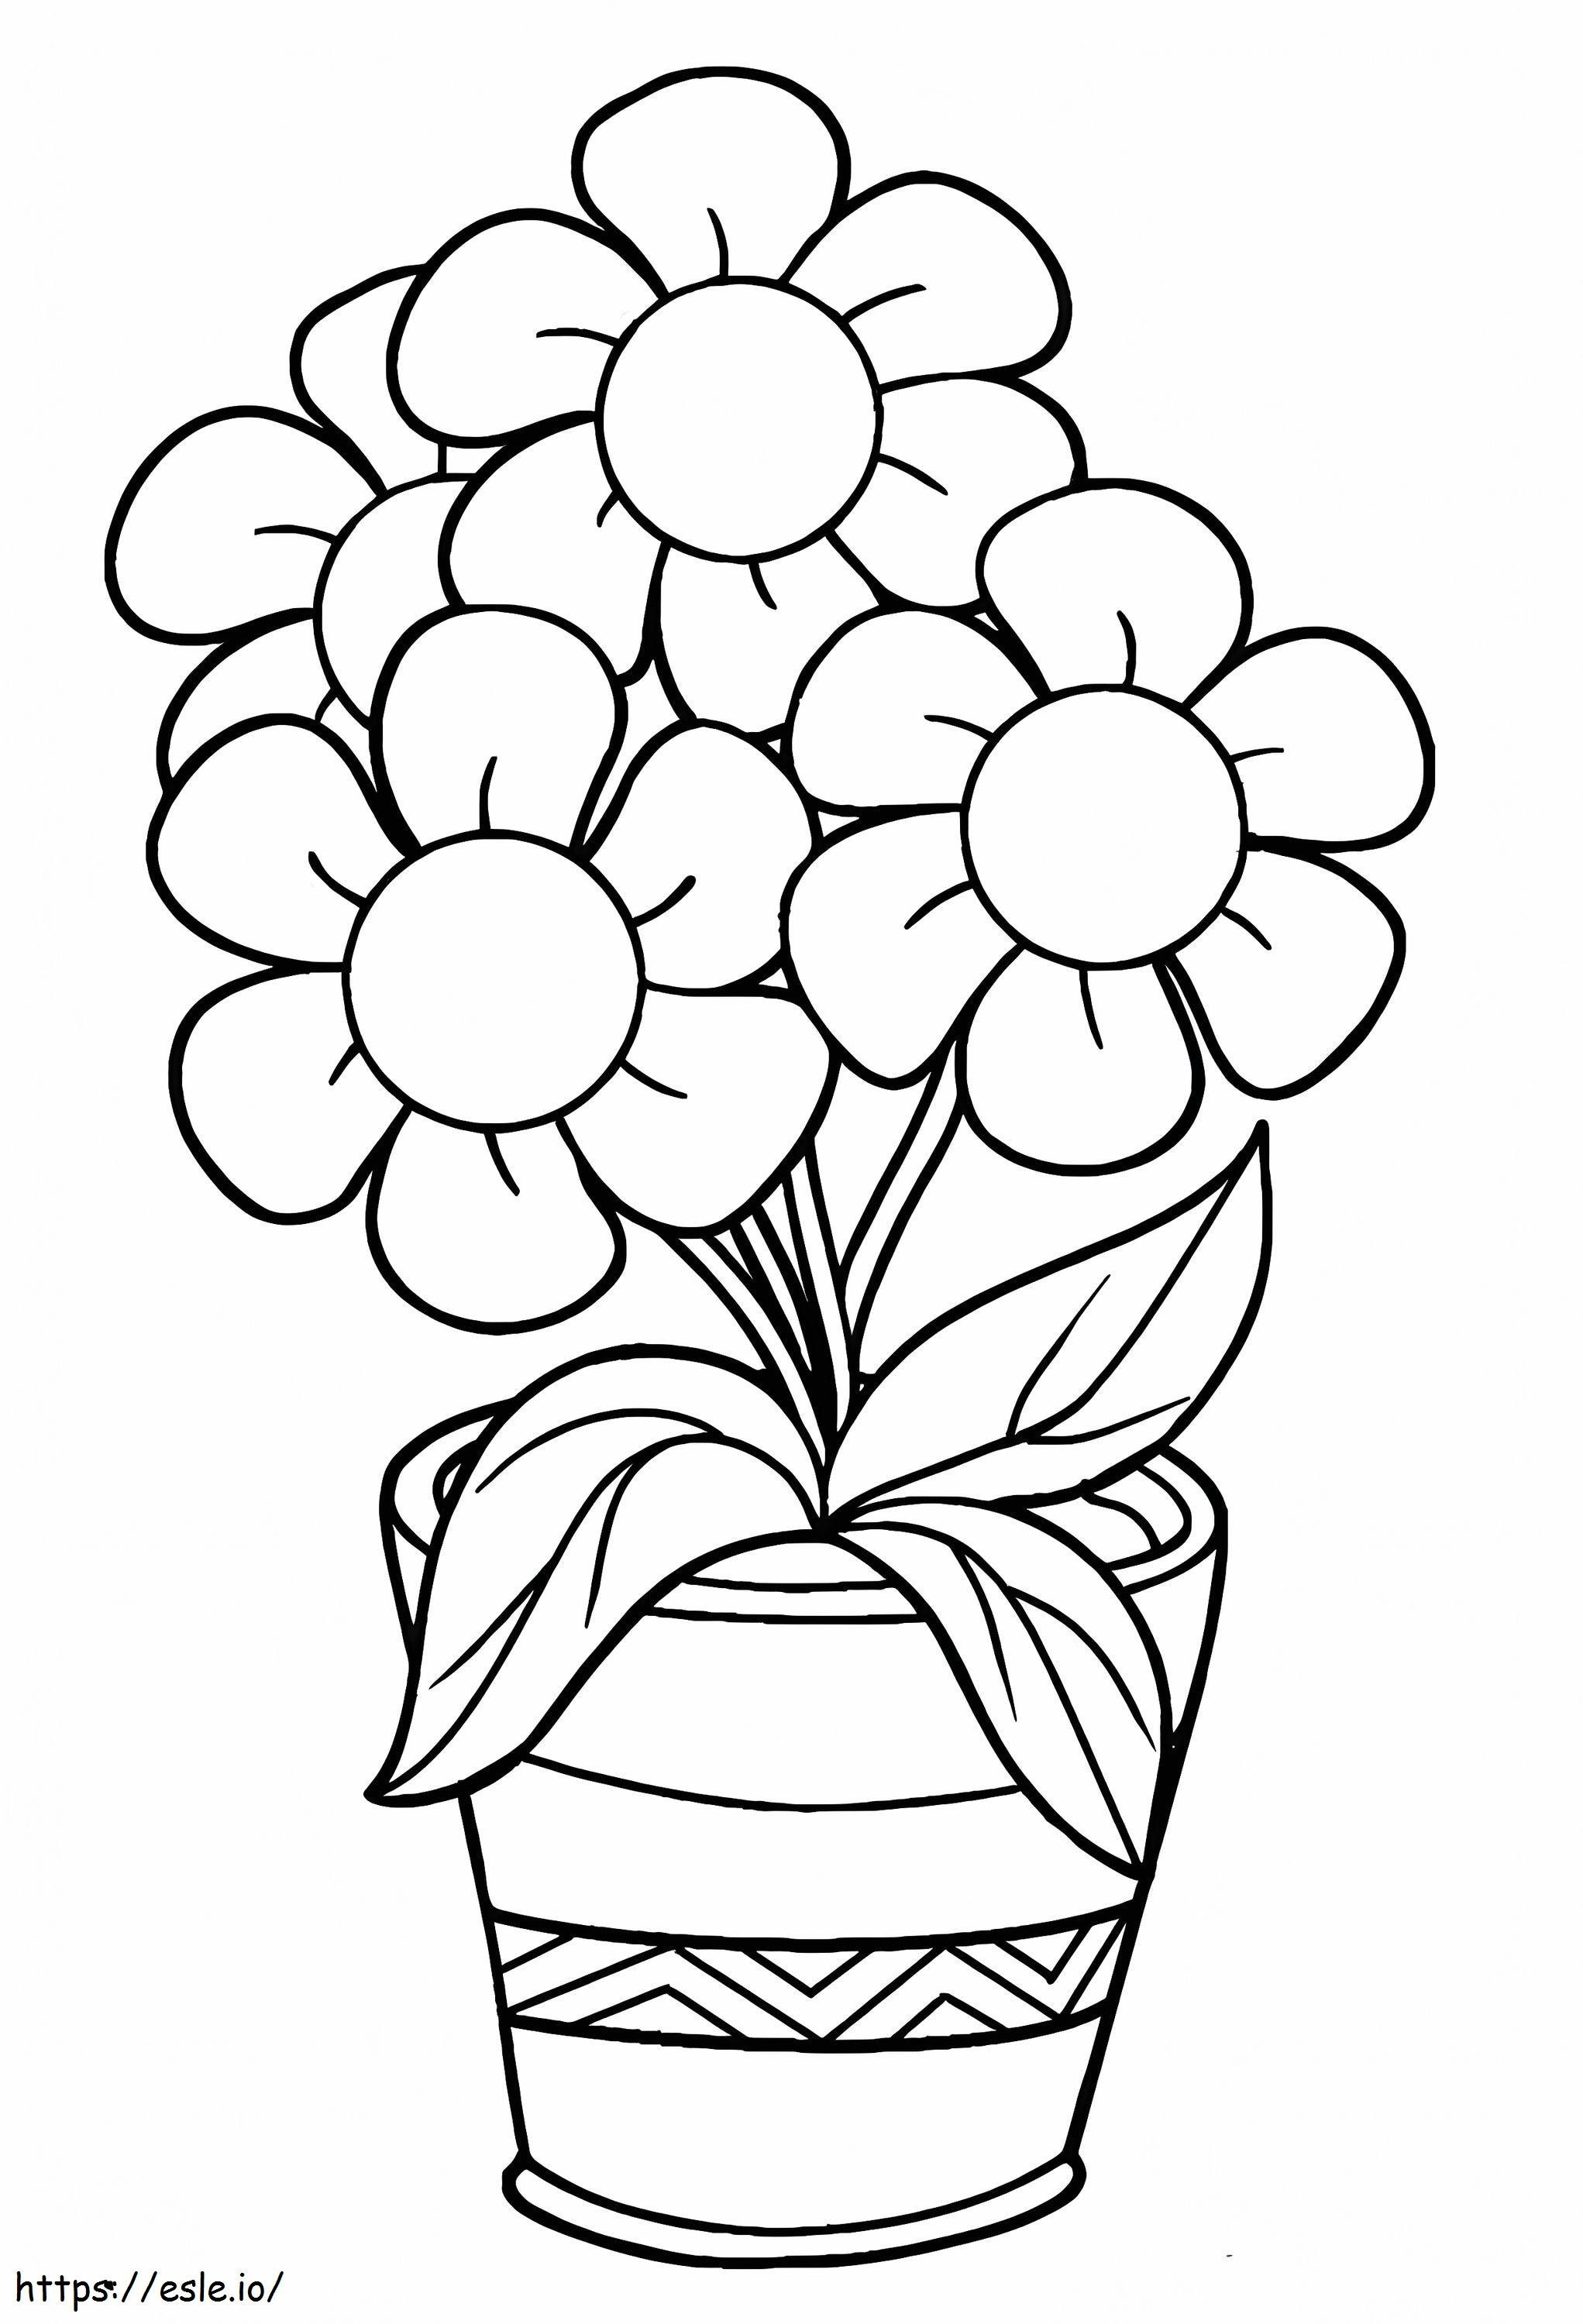 Basic Flower coloring page